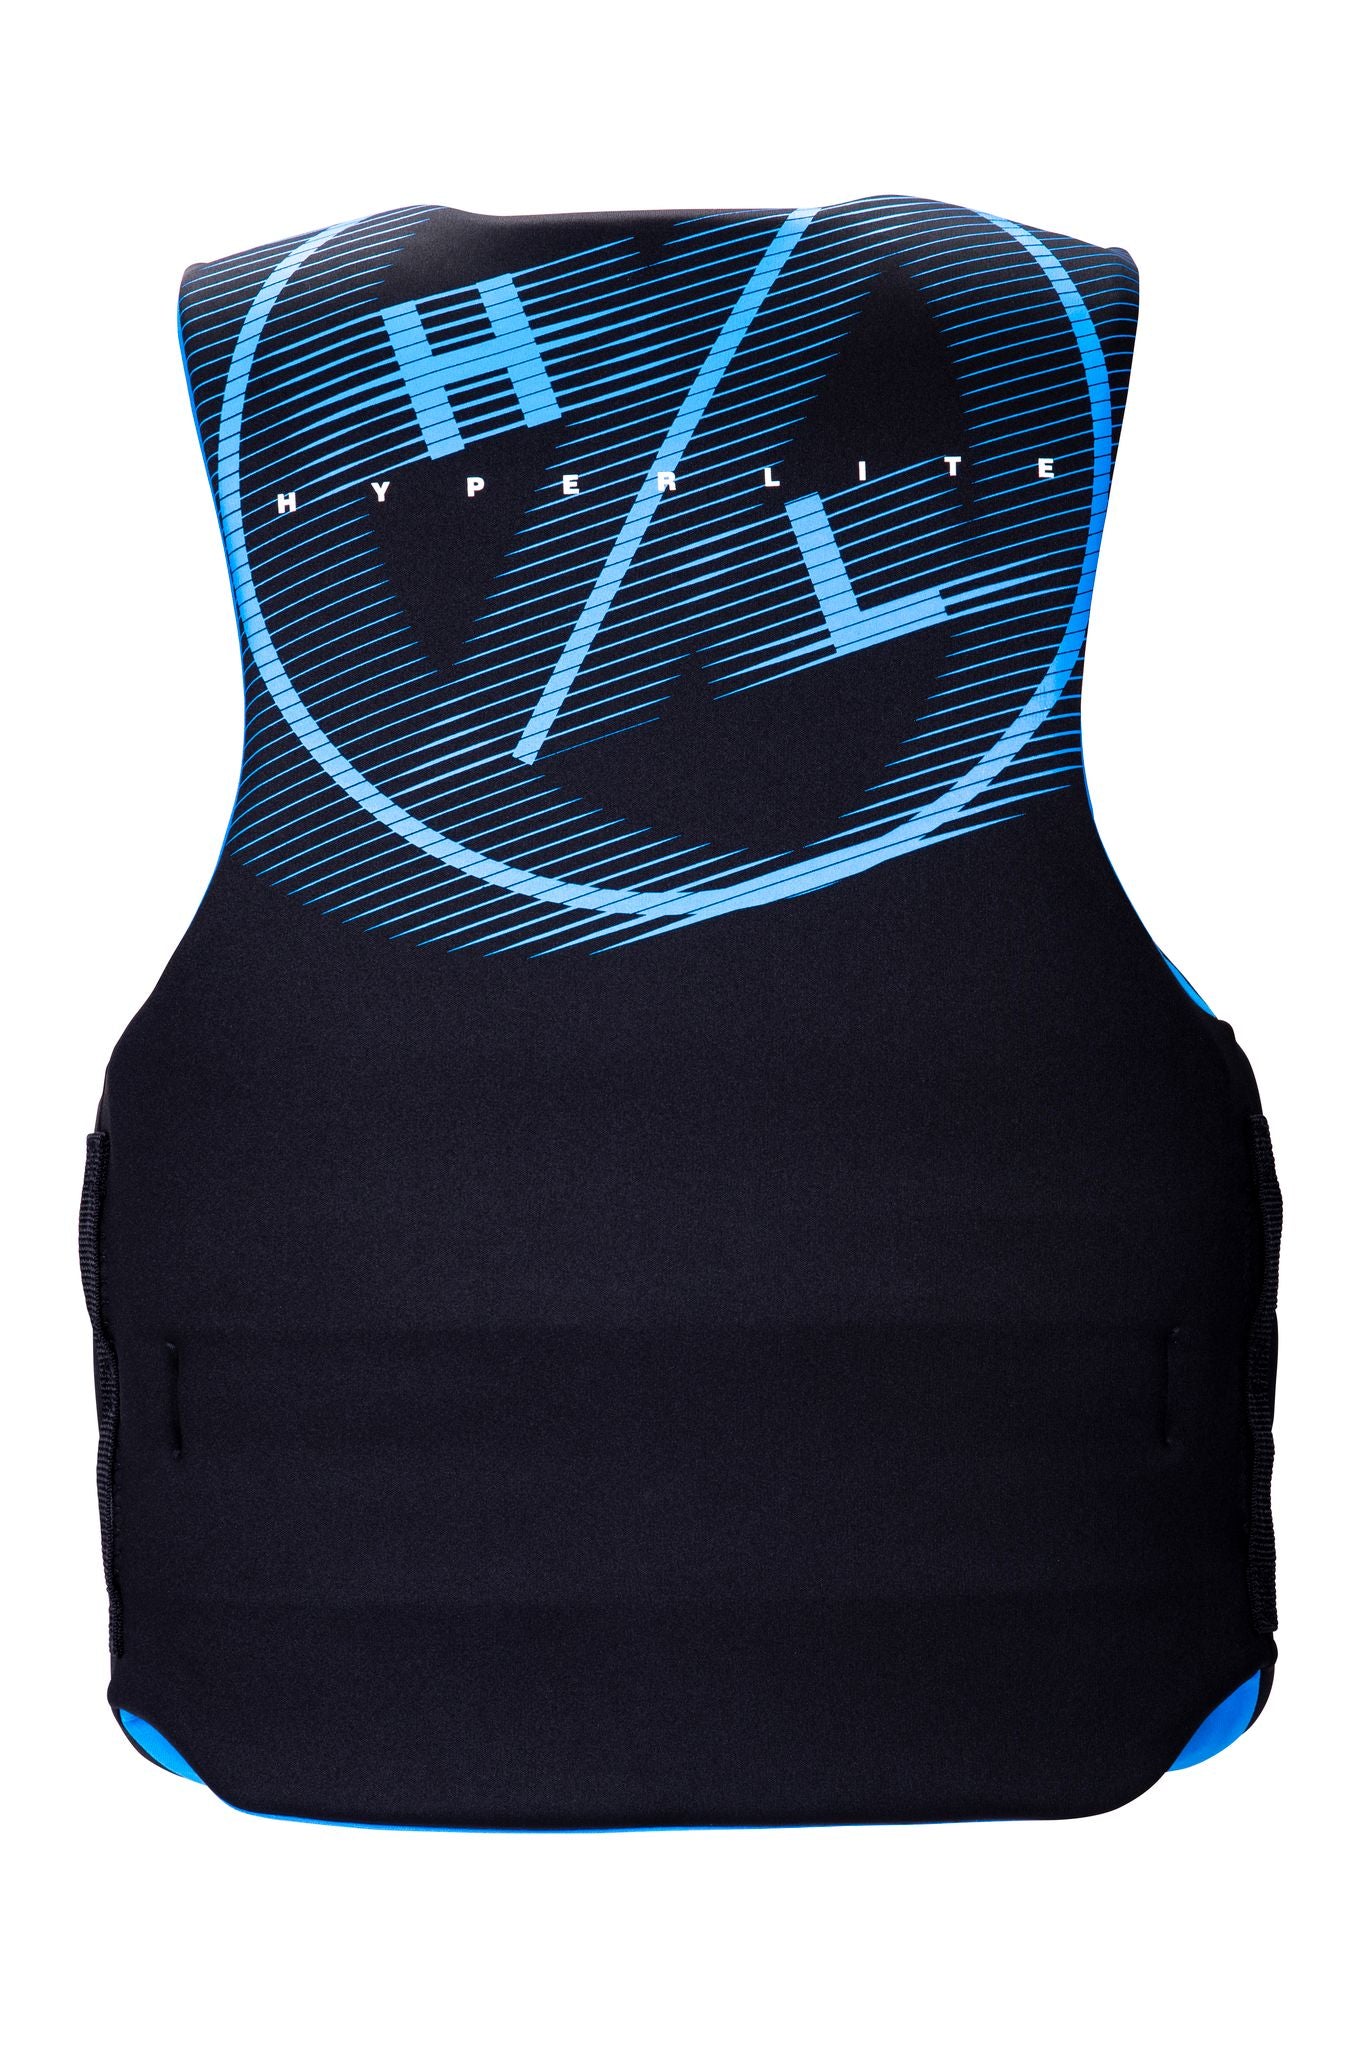 A Hyperlite Men's Indy CGA Vest - Black/Blue that prioritizes safety as essential water safety equipment.